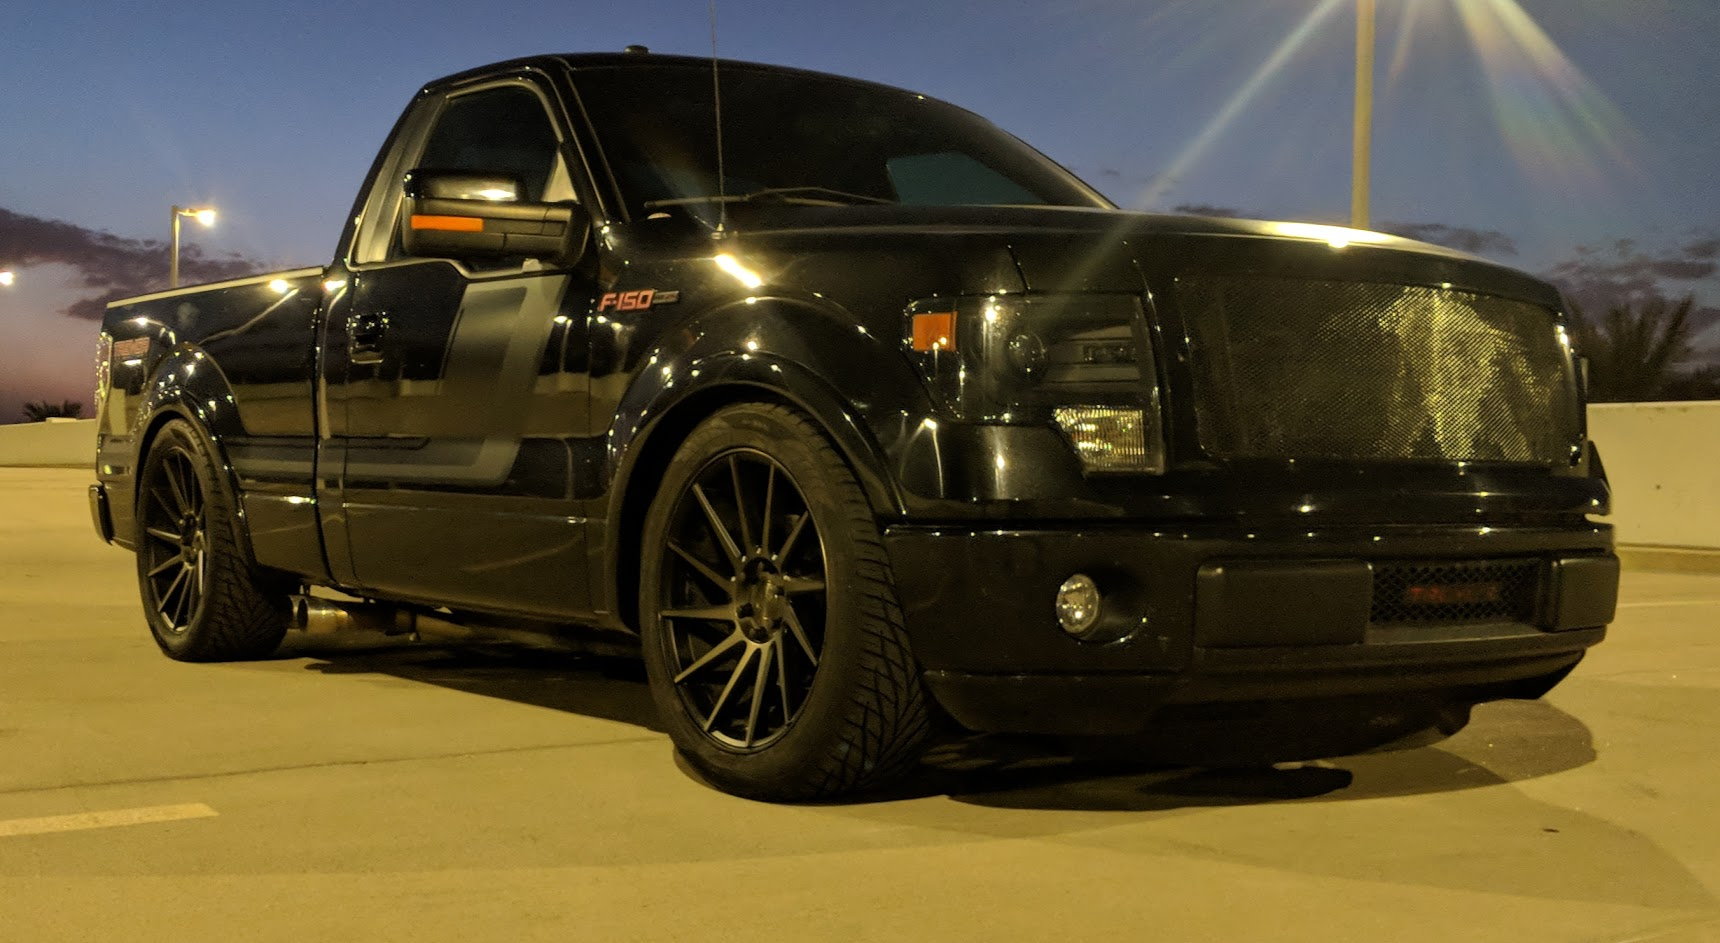 14 Tremor 4 6 Drop With C Notch Ford F150 Forum Community Of Ford Truck Fans